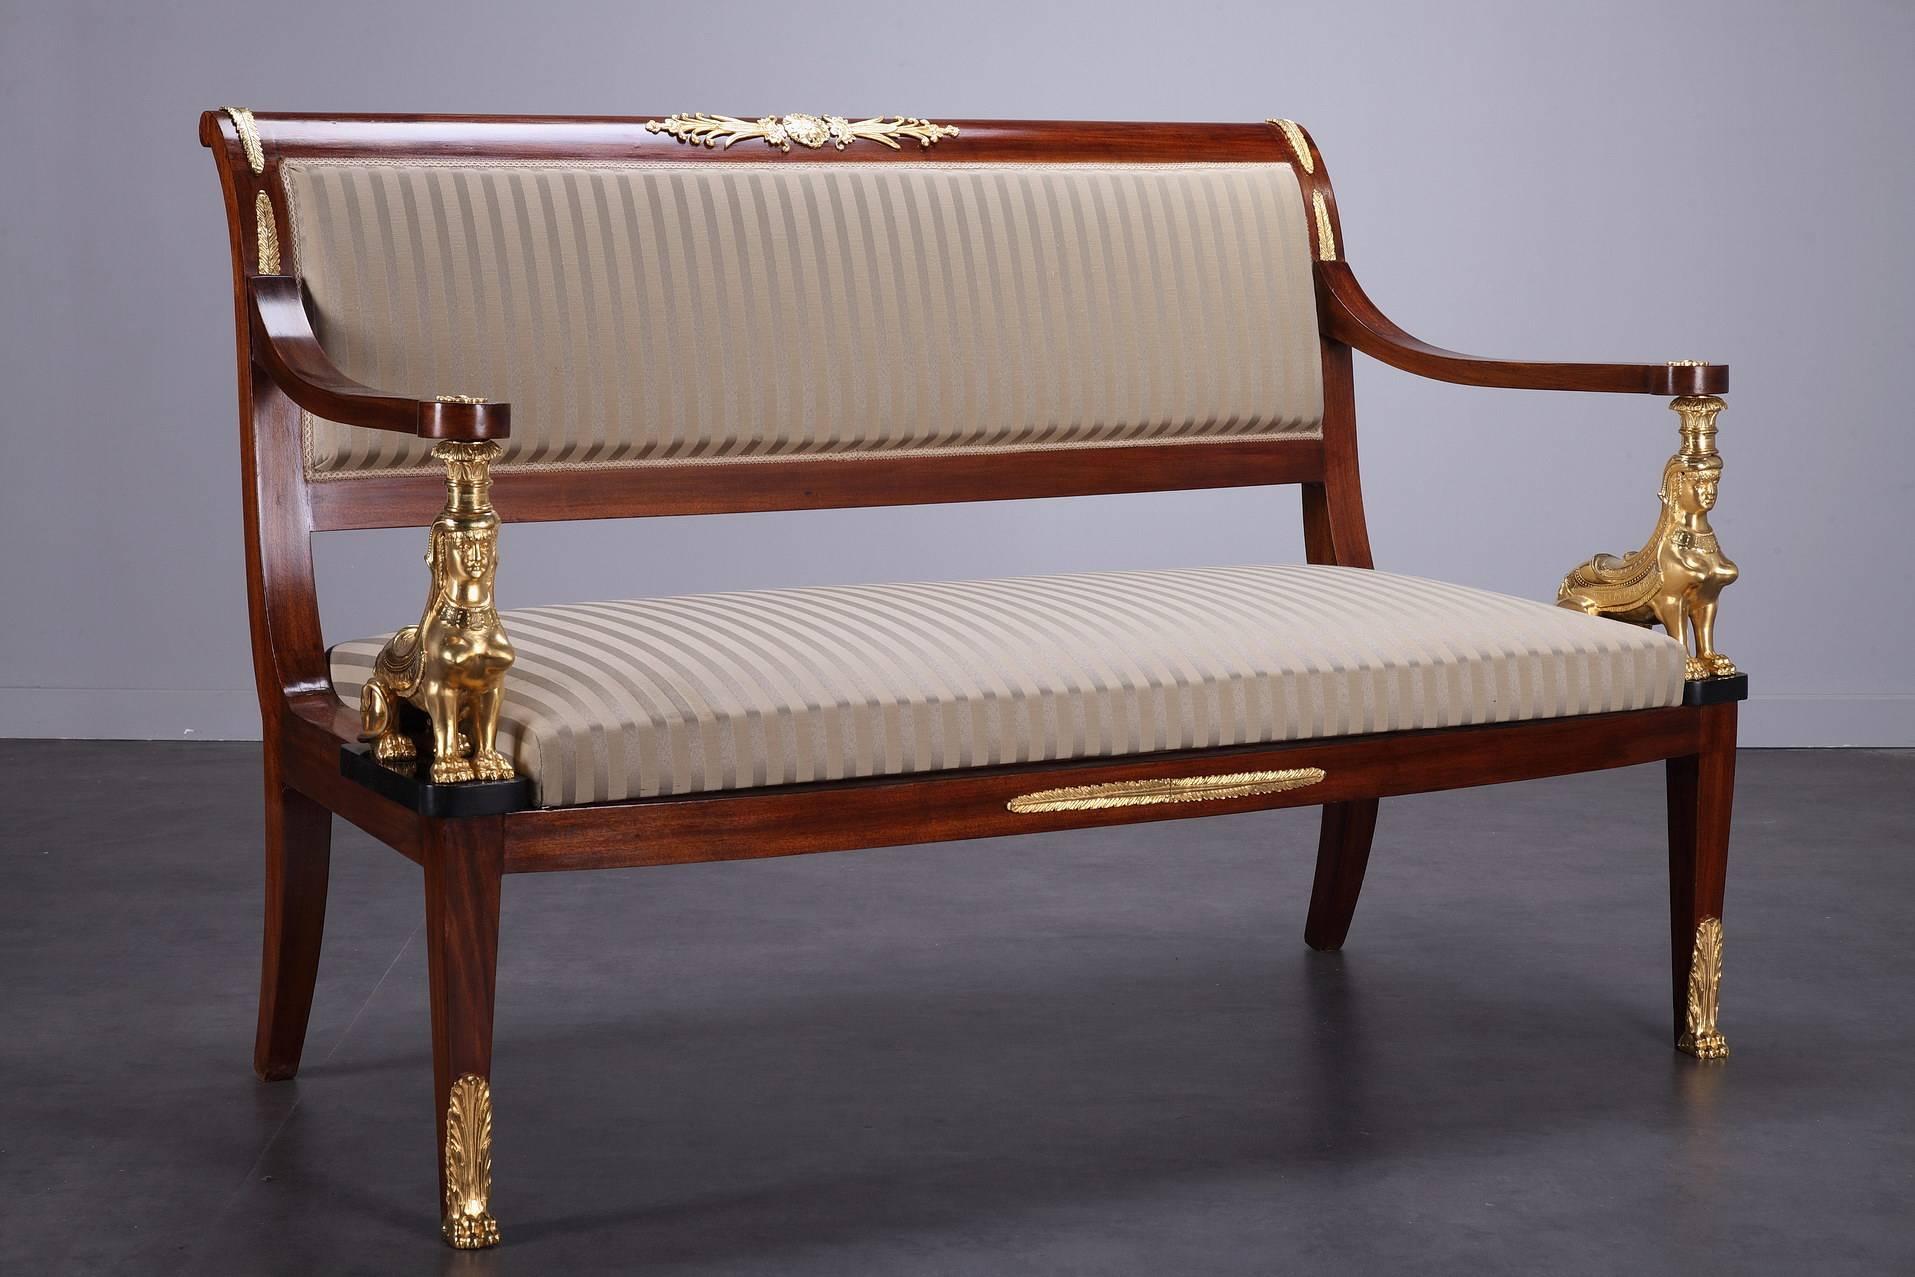 Mahogany living room set in Return from Egypt style composed of a sofa, two chairs and two armchairs. The wood framing of the sofa and armchairs is embellished with ormolu rosette and foliage. The arms are resting on sphinx and the belt is decorated